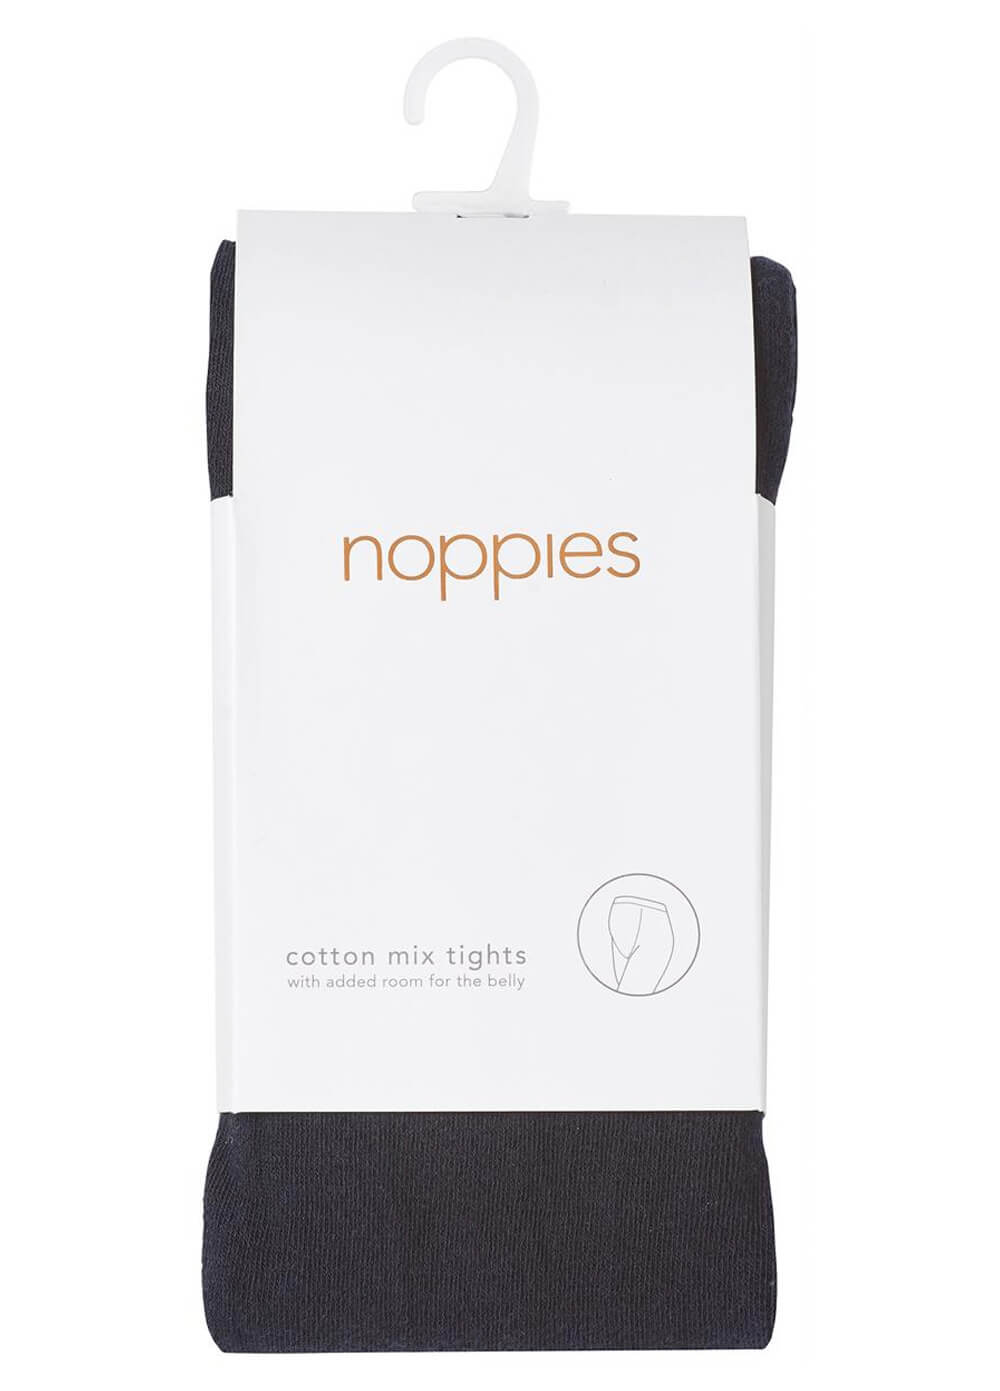 Winter Knit Maternity Tights in Black by Noppies